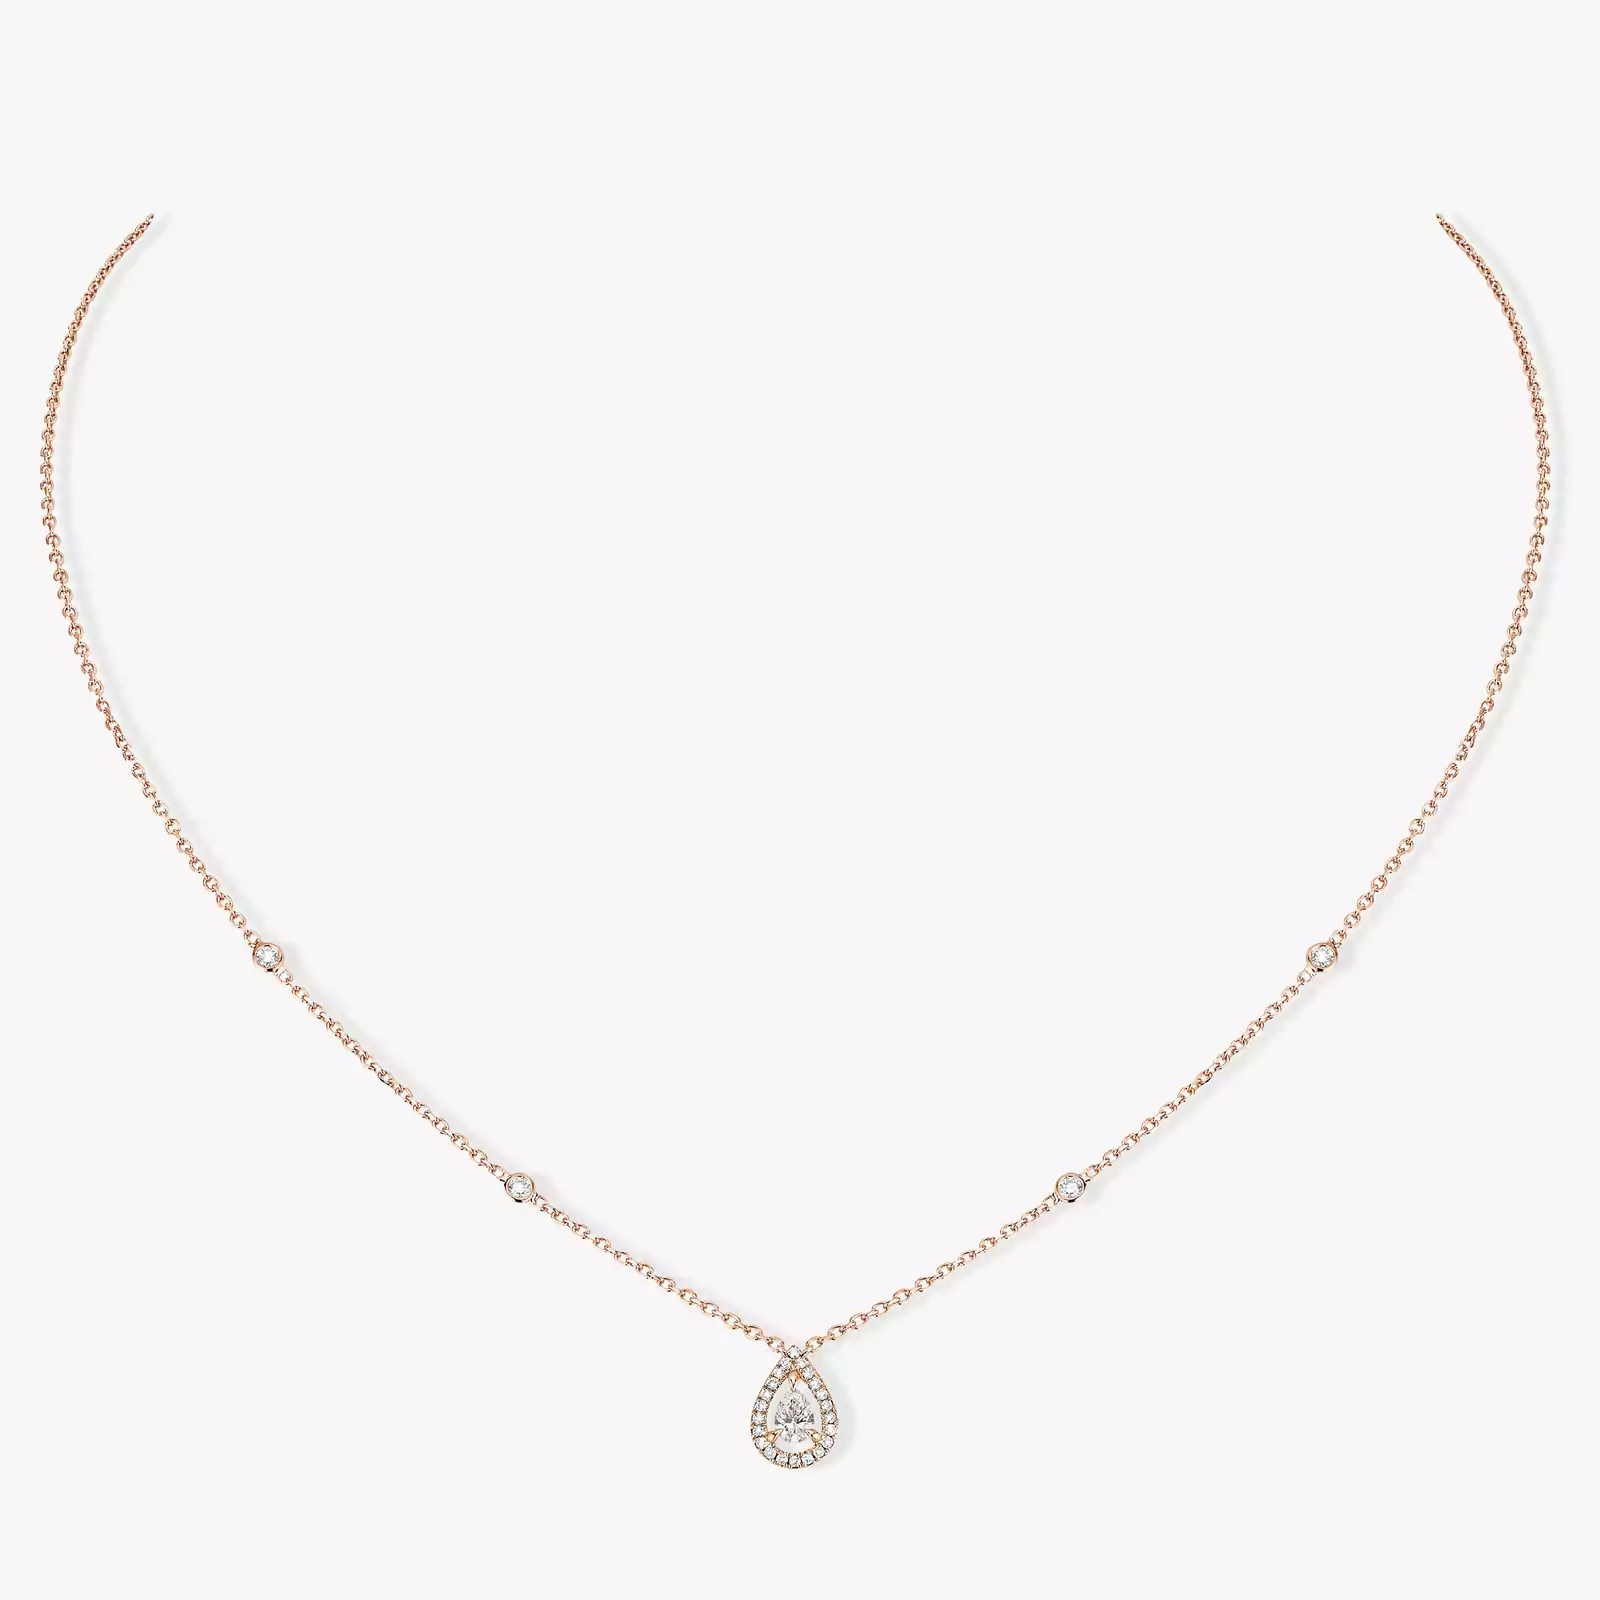 Joy Pear Diamond 0.25ct Pink Gold For Her Diamond Necklace 05224-PG